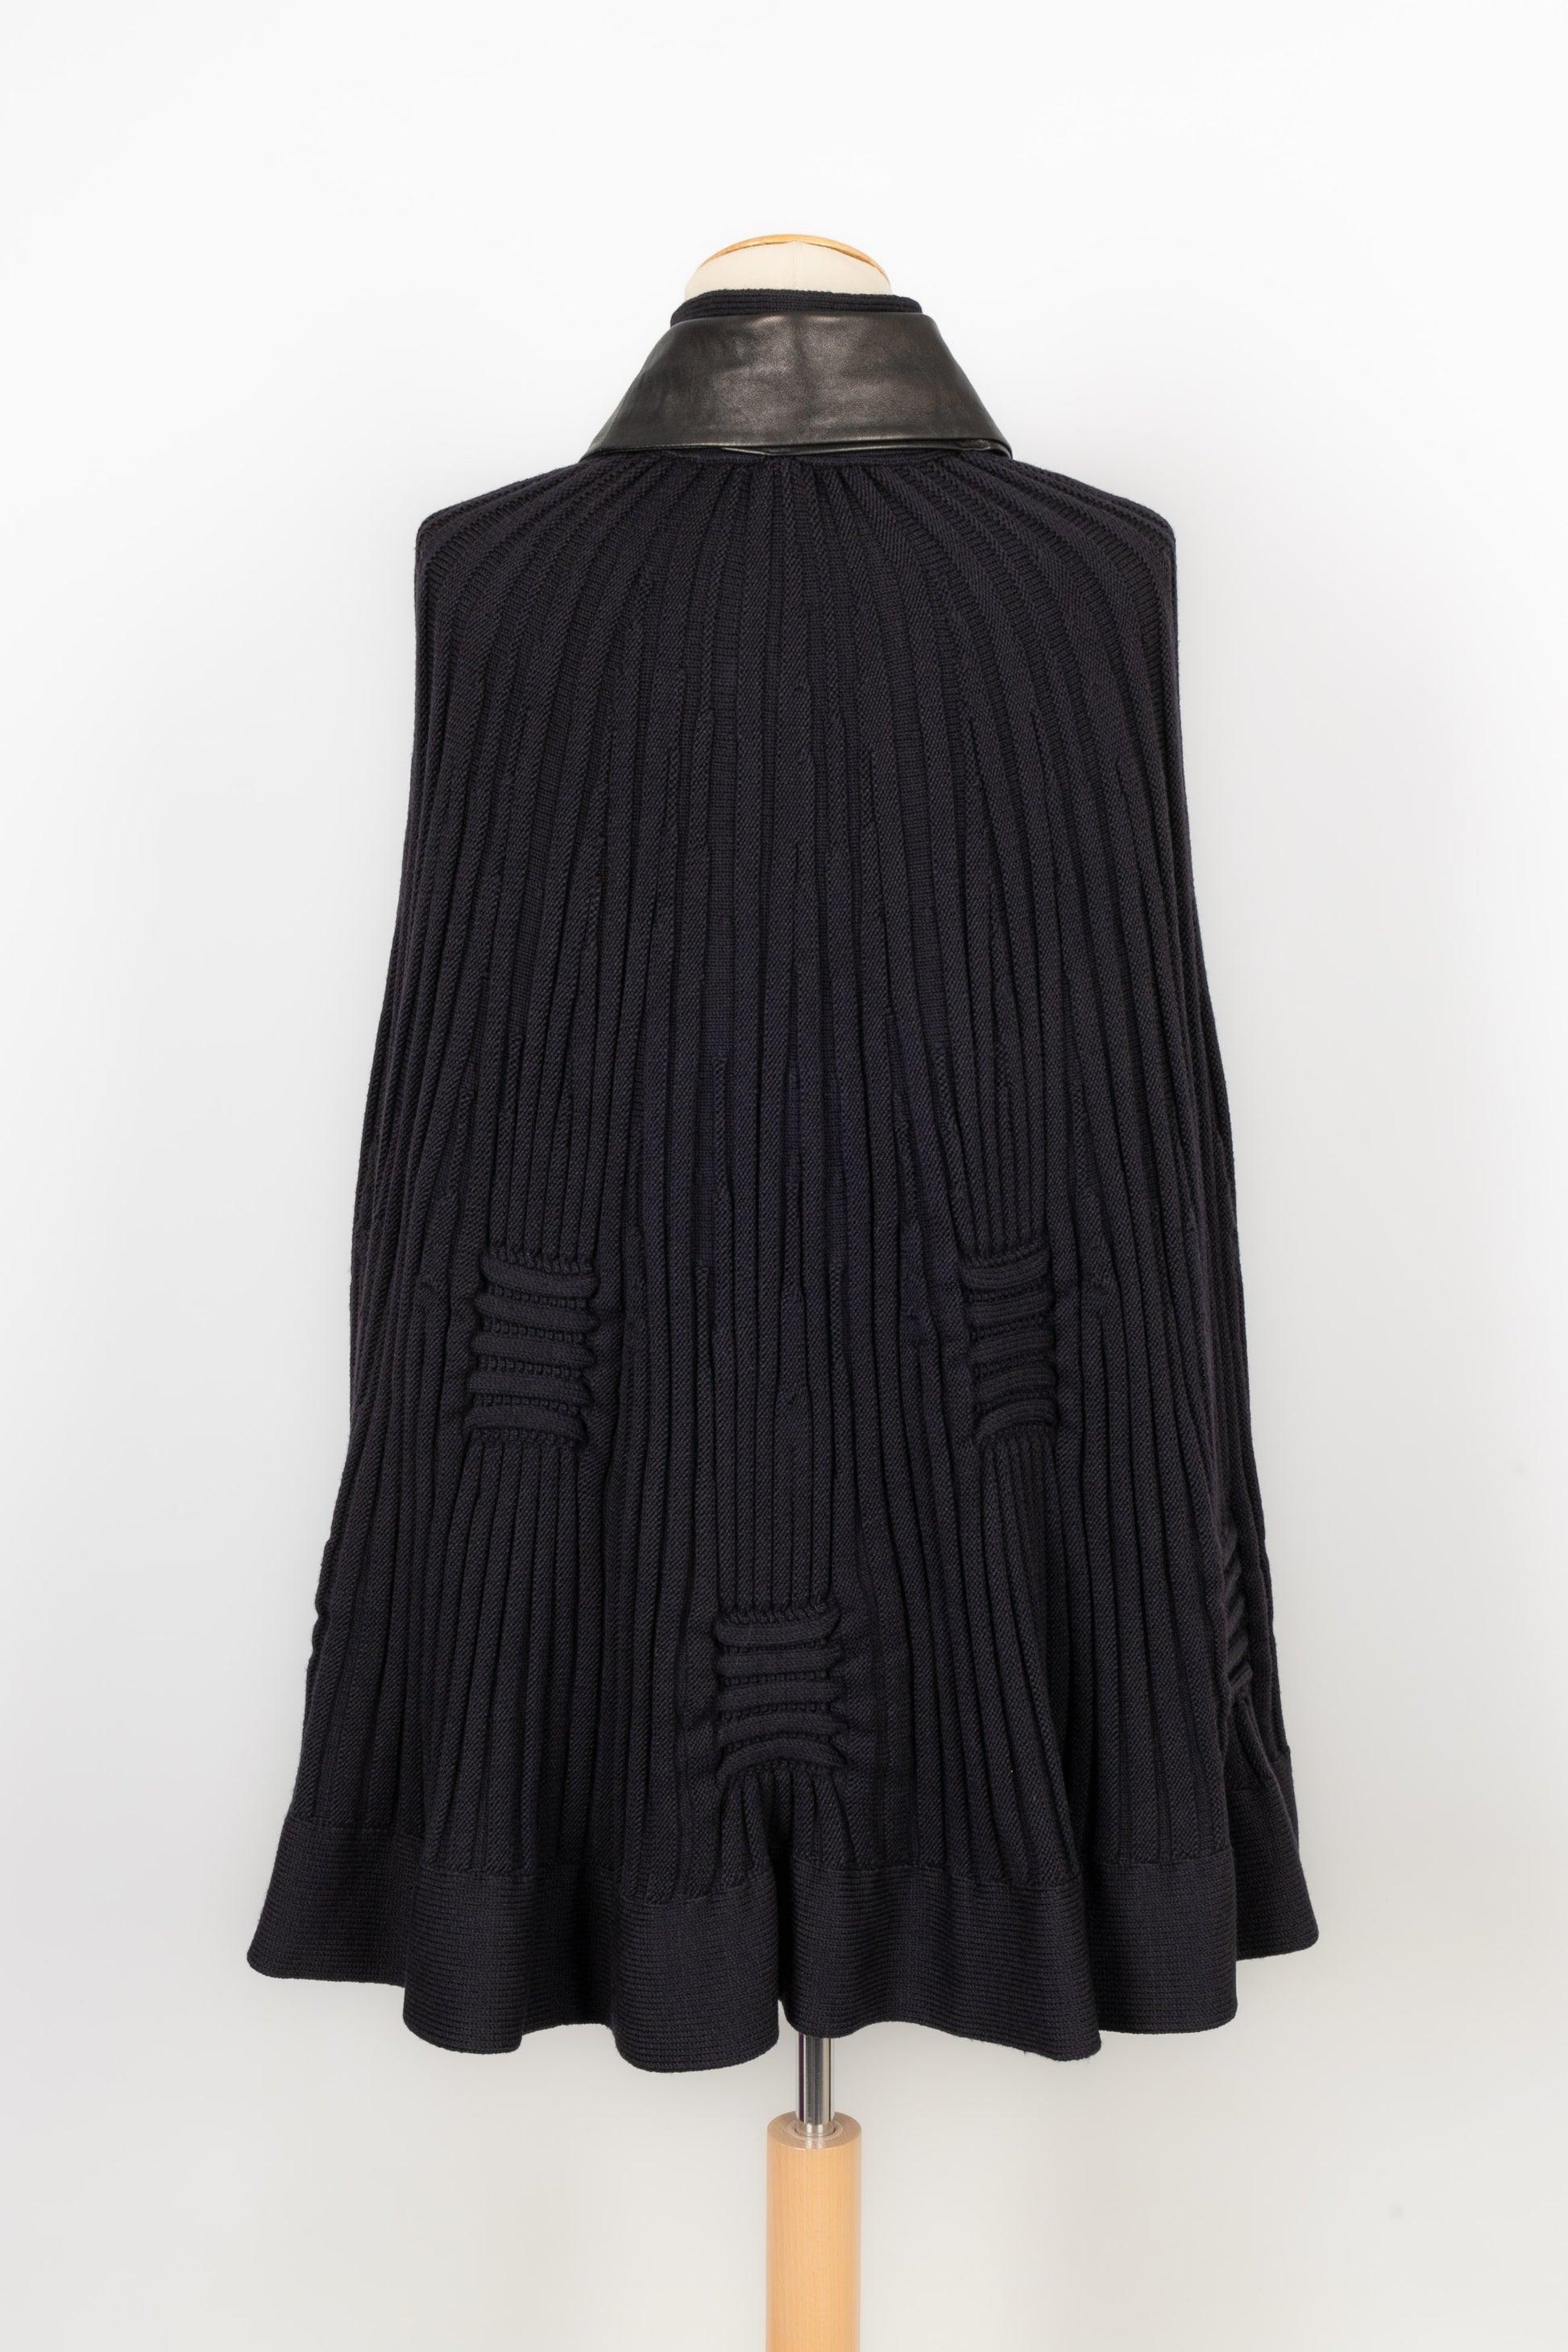 Valentino Wool Cape with Black Leather Ascot Tie For Sale 1